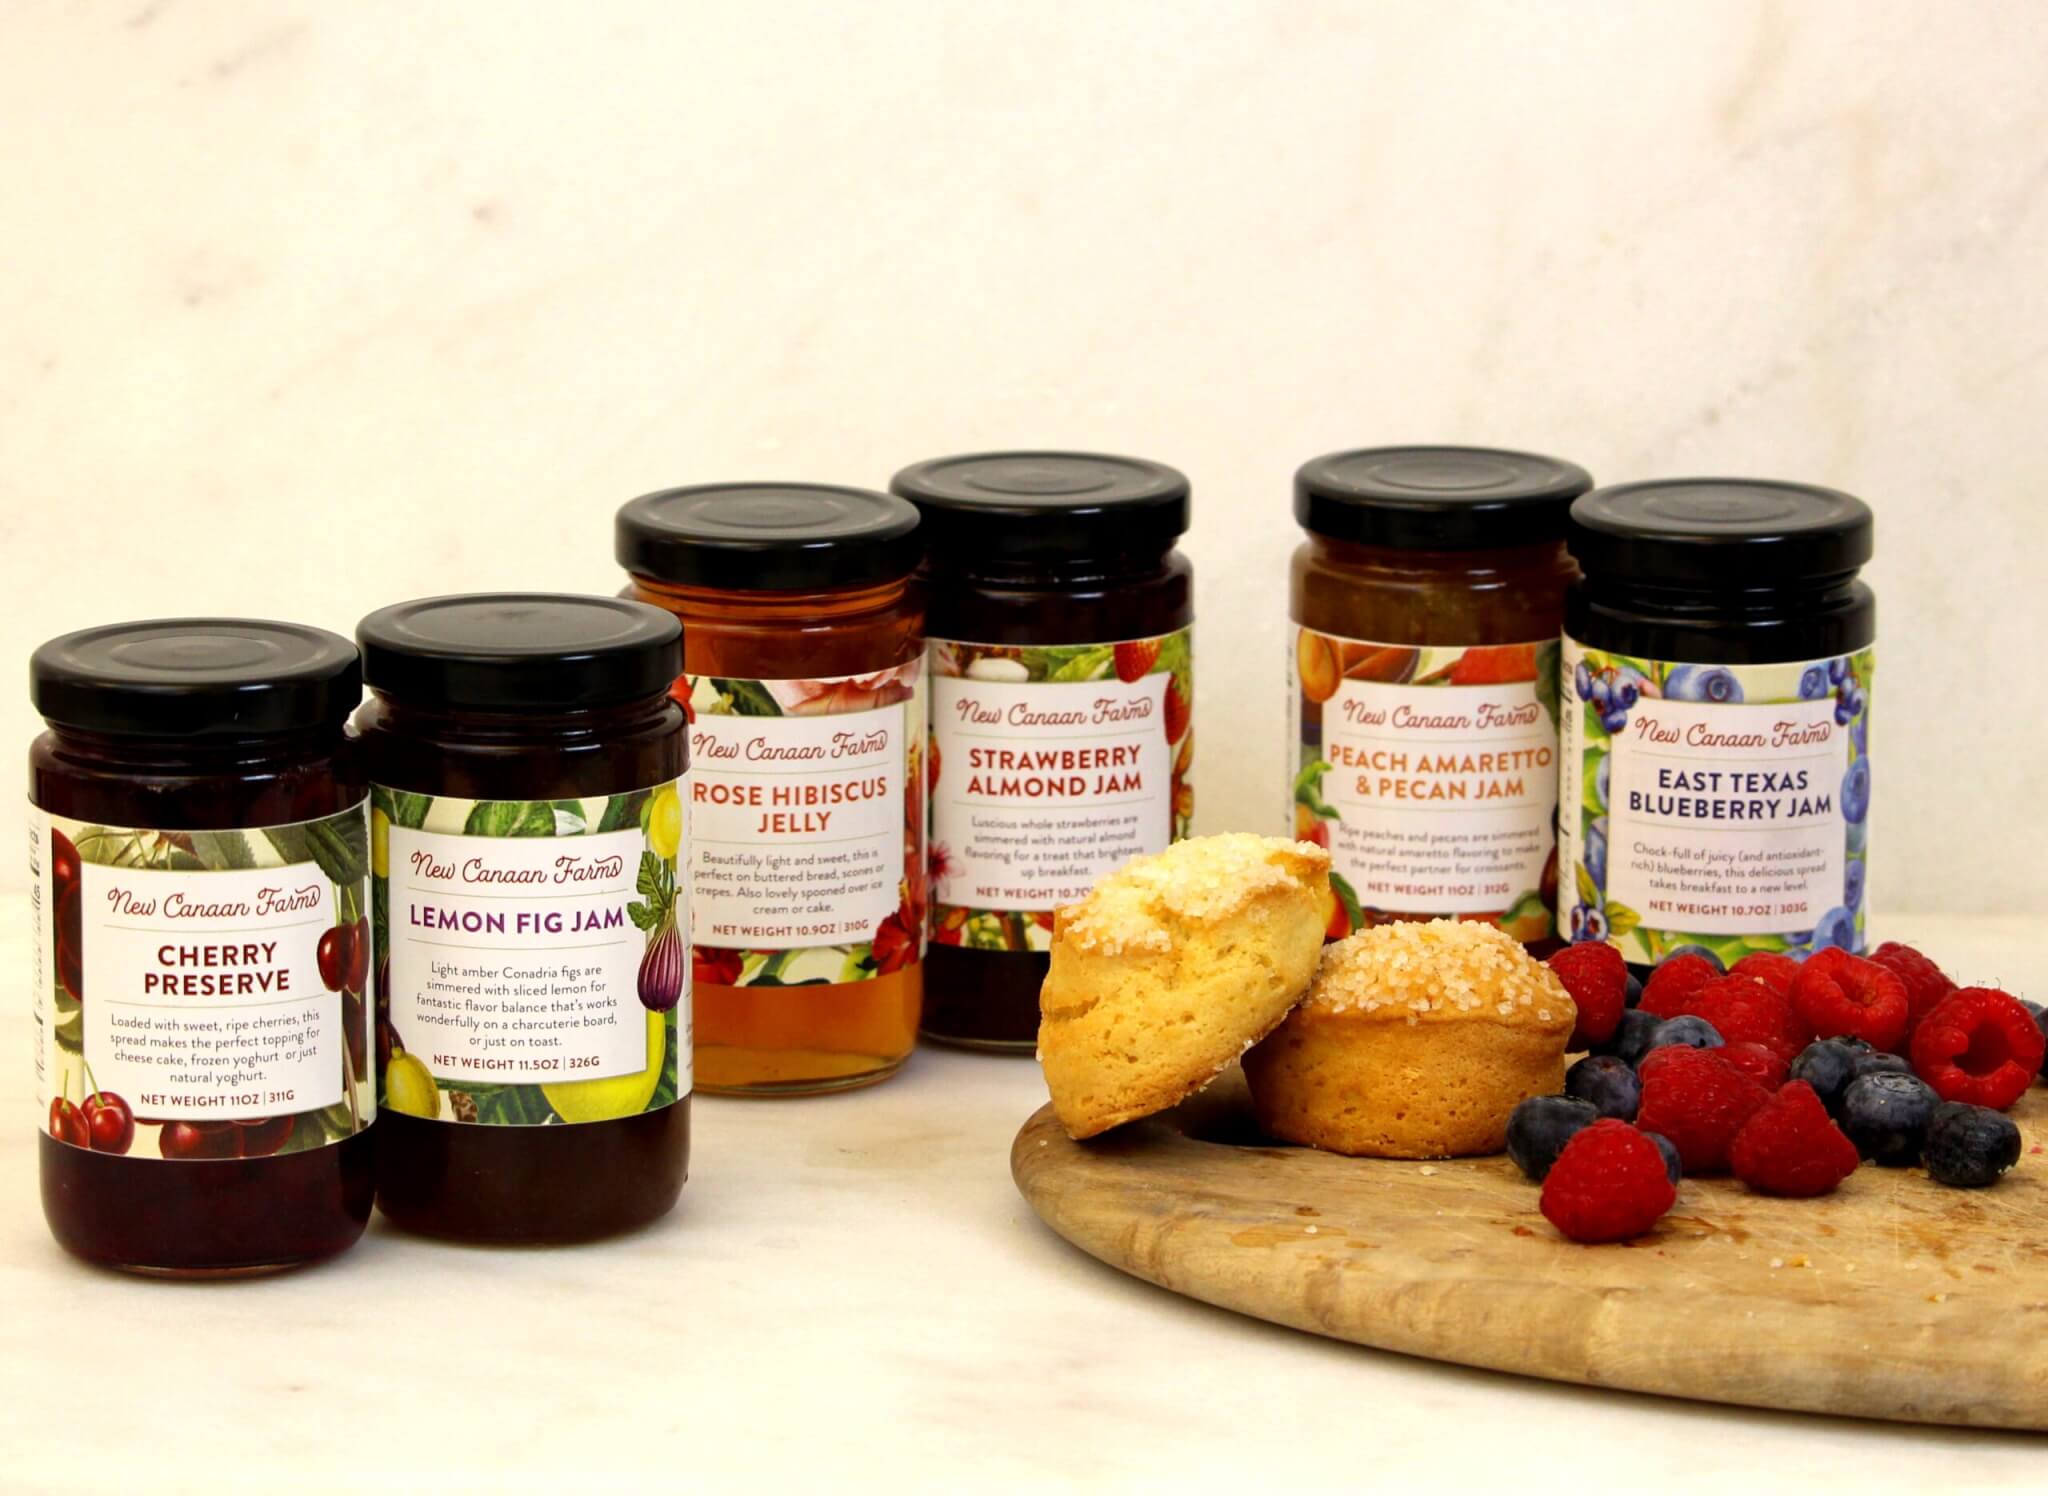 Six New Canaan Farms sweet jams with beautiful new product labels